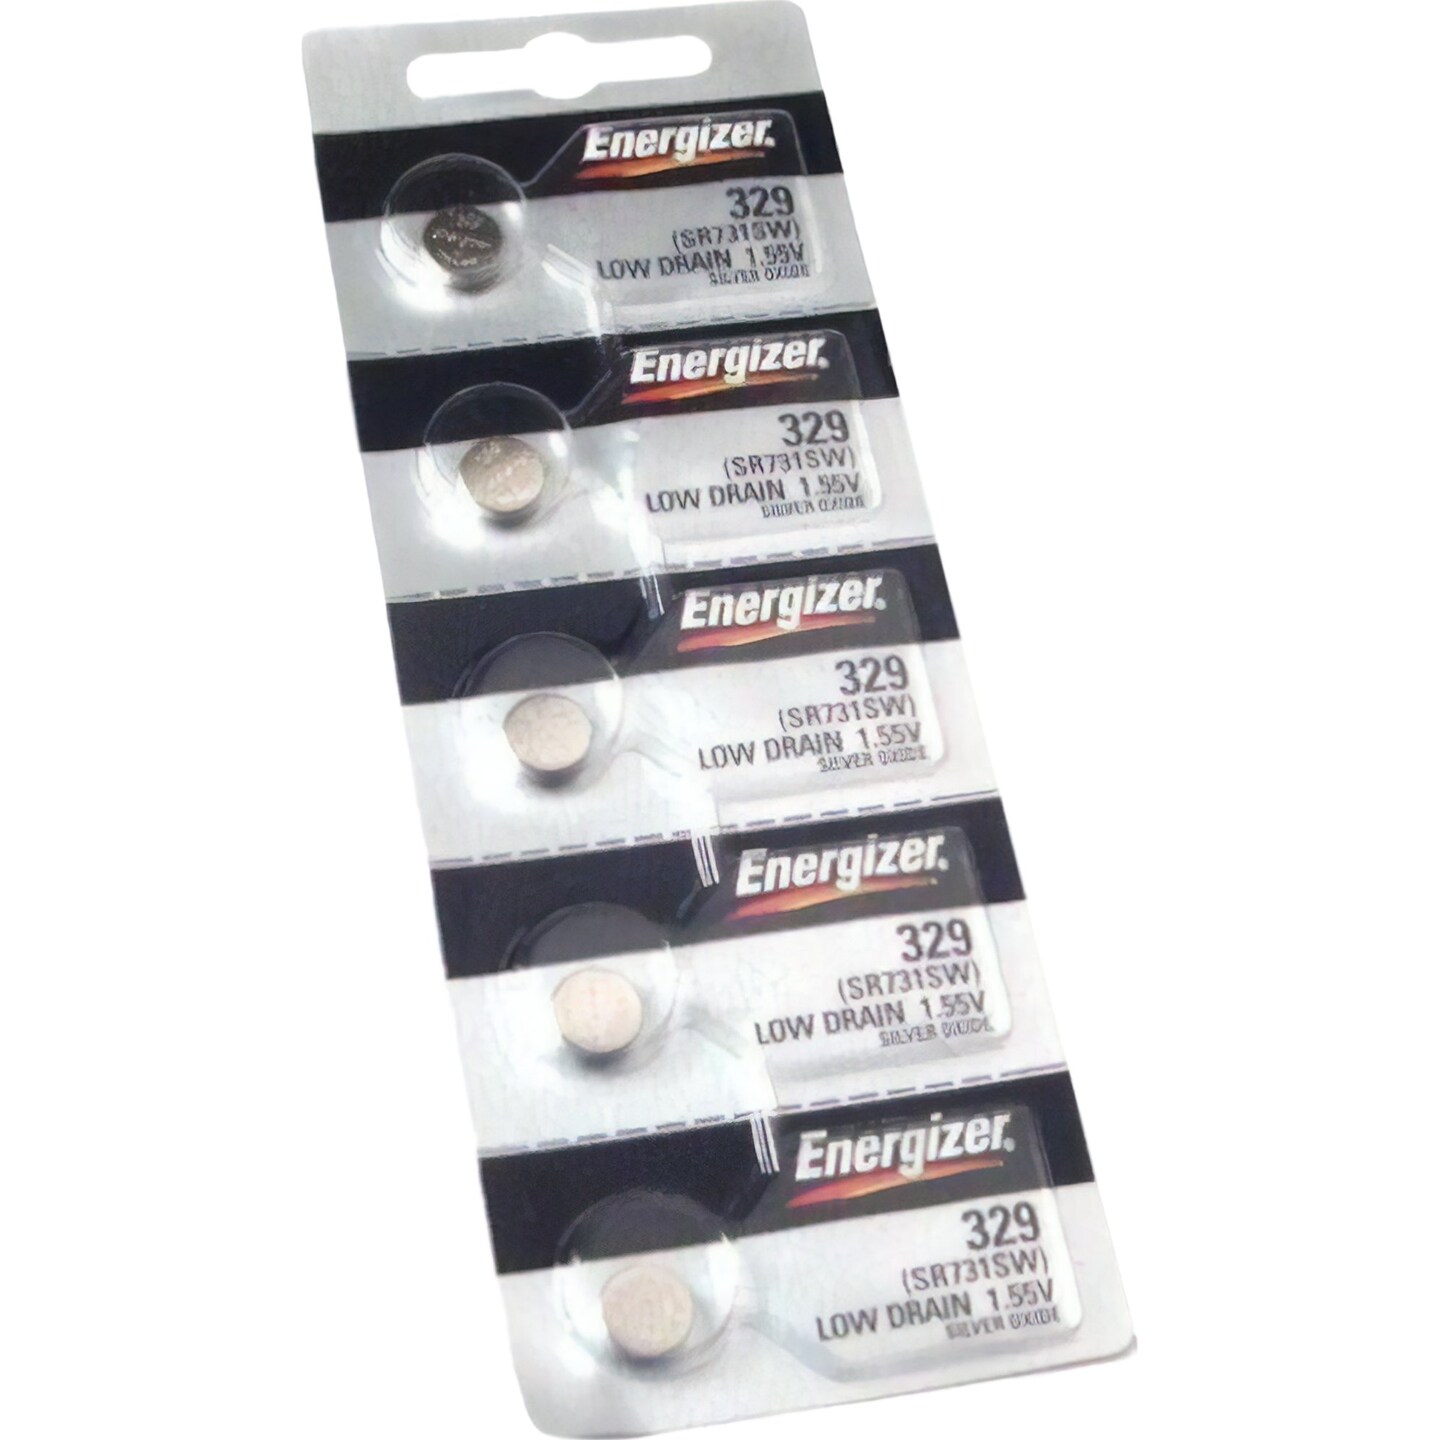 5 329 Energizer Watch Batteries SR731SW Battery Cell